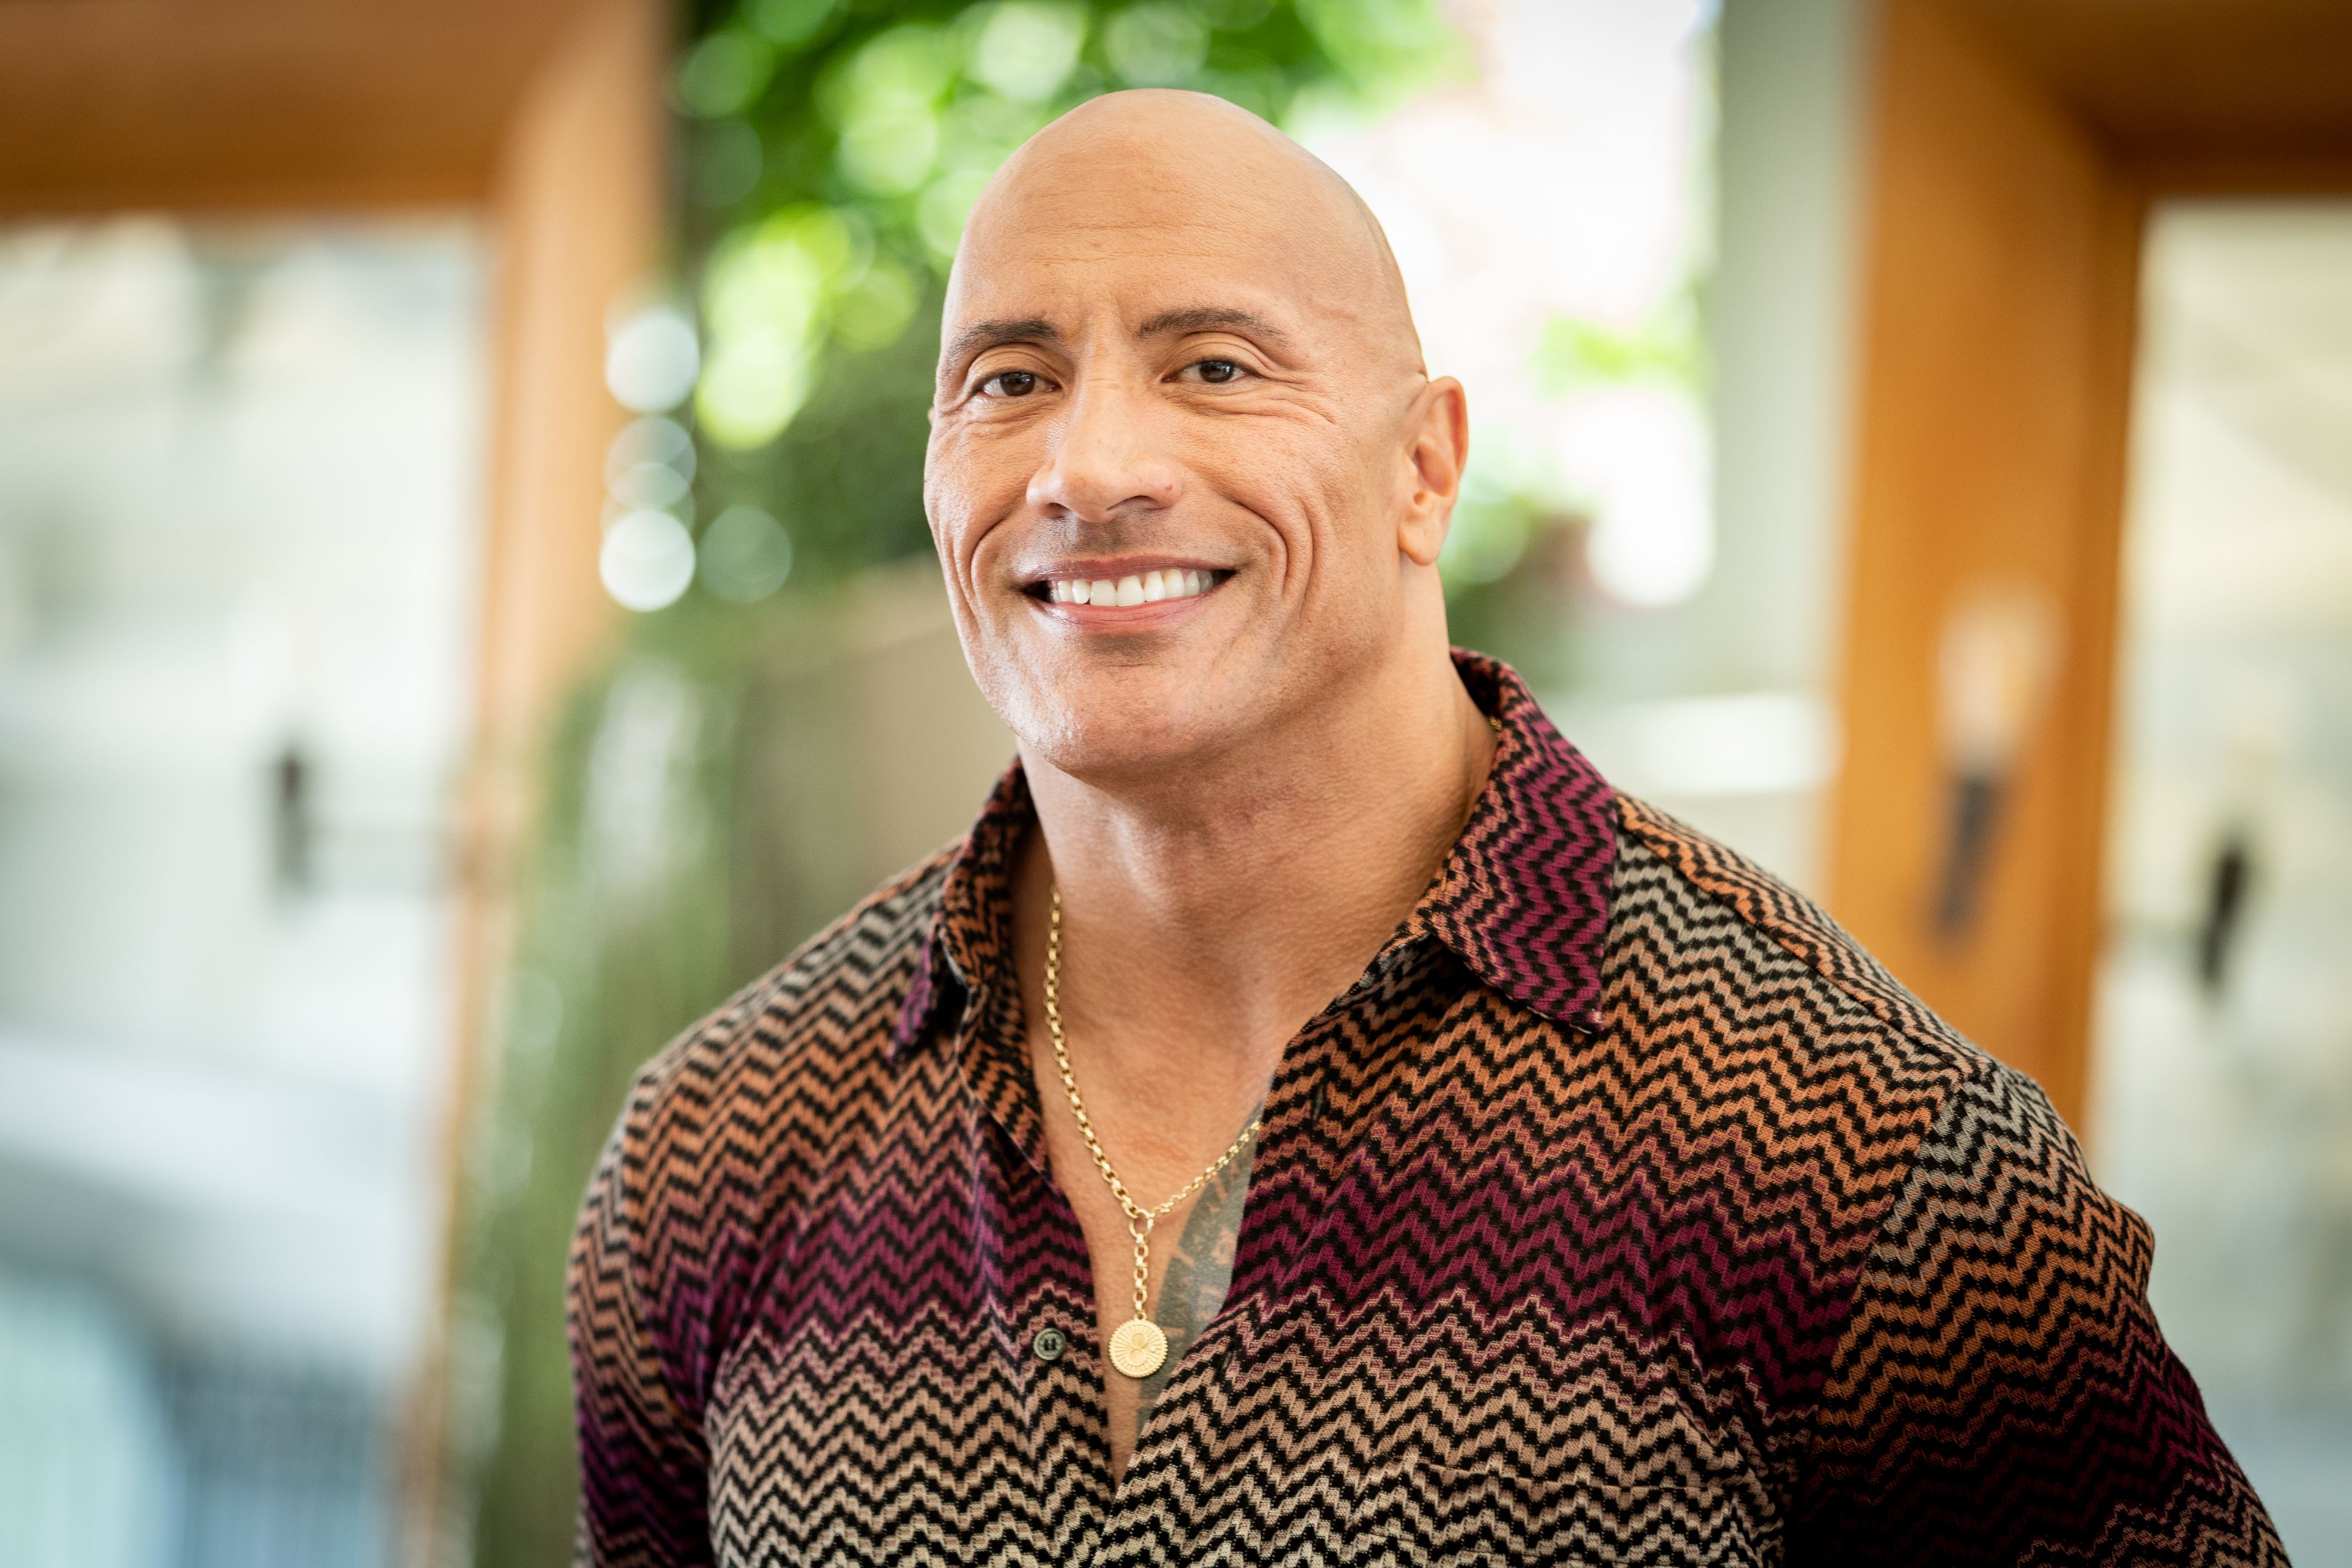 Collection, Dwayne The Rock Johnson